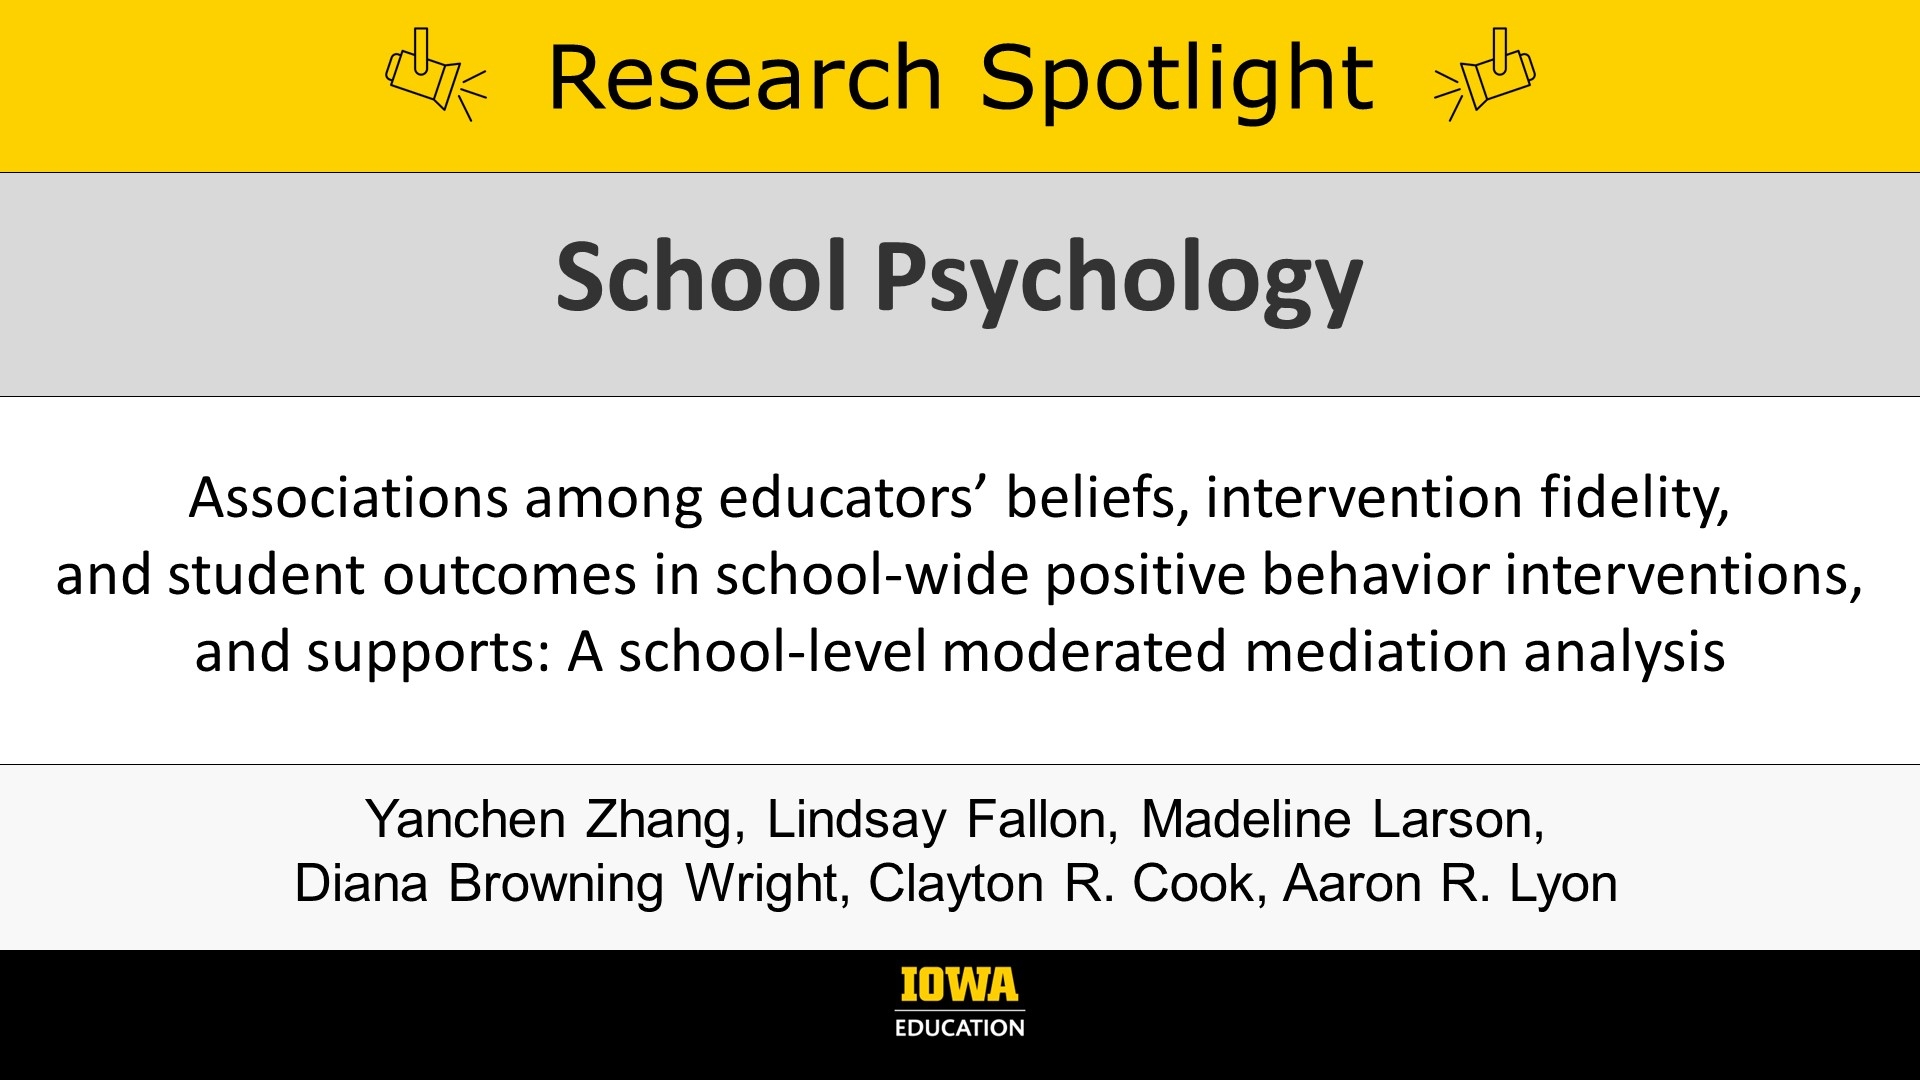 Research Spotlight: Associations among educators’ beliefs, intervention fidelity, and student outcomes in school-wide positive behavior interventions, and supports: A school-level moderated mediation analysis. In School Psychology